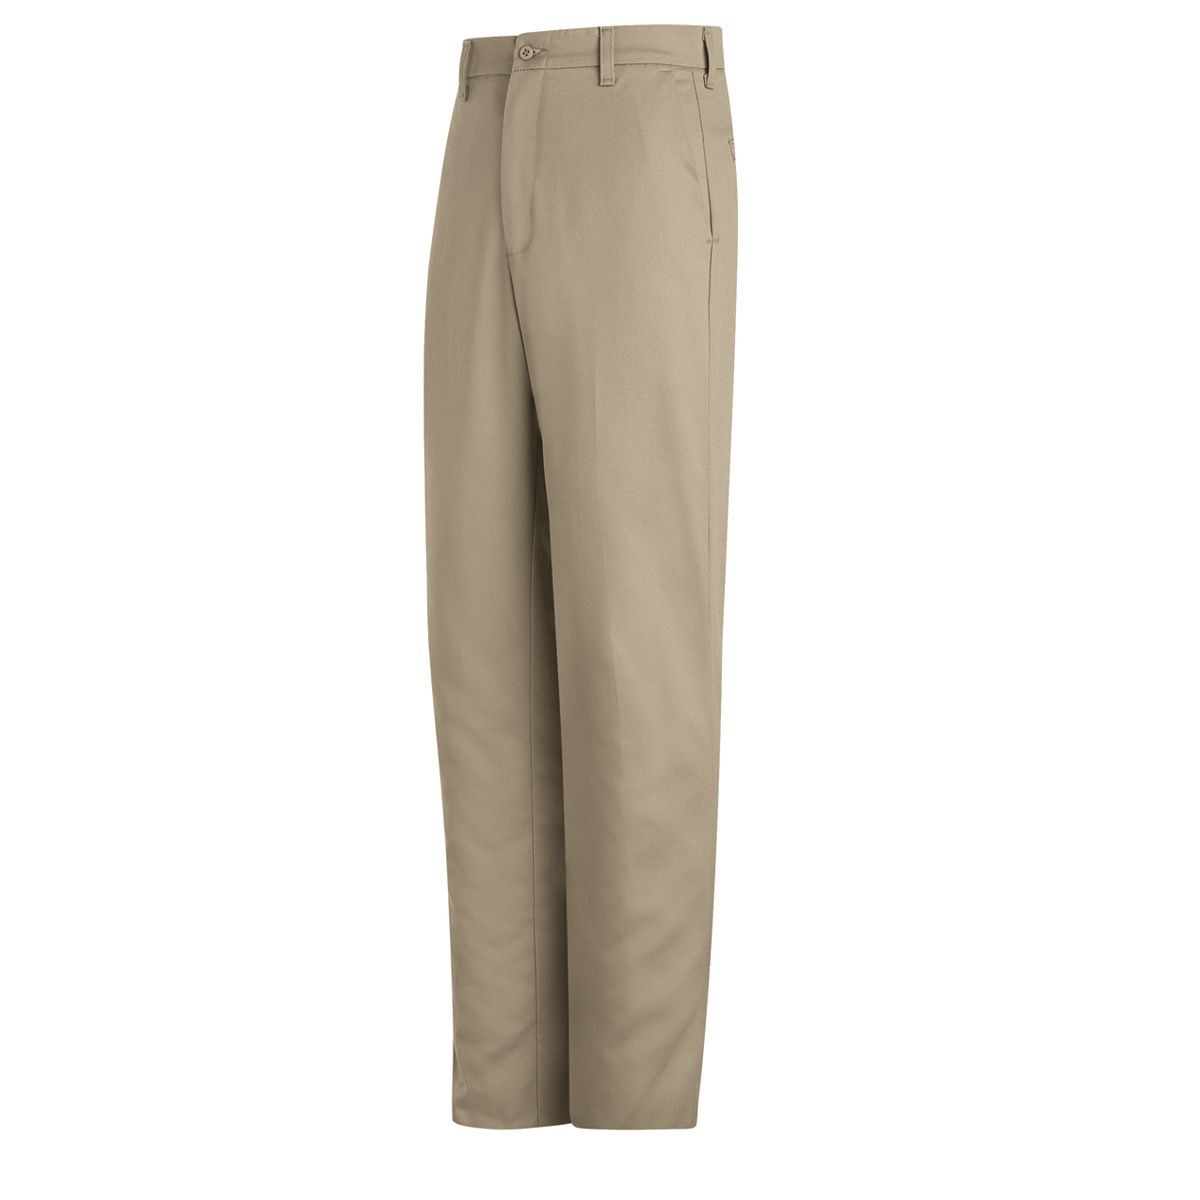 Airgas - R30PEW2KH4432 - Bulwark® 44 X 32 Khaki EXCEL FR® Twill Cotton  Flame Resistant Work Pants With Button Closure